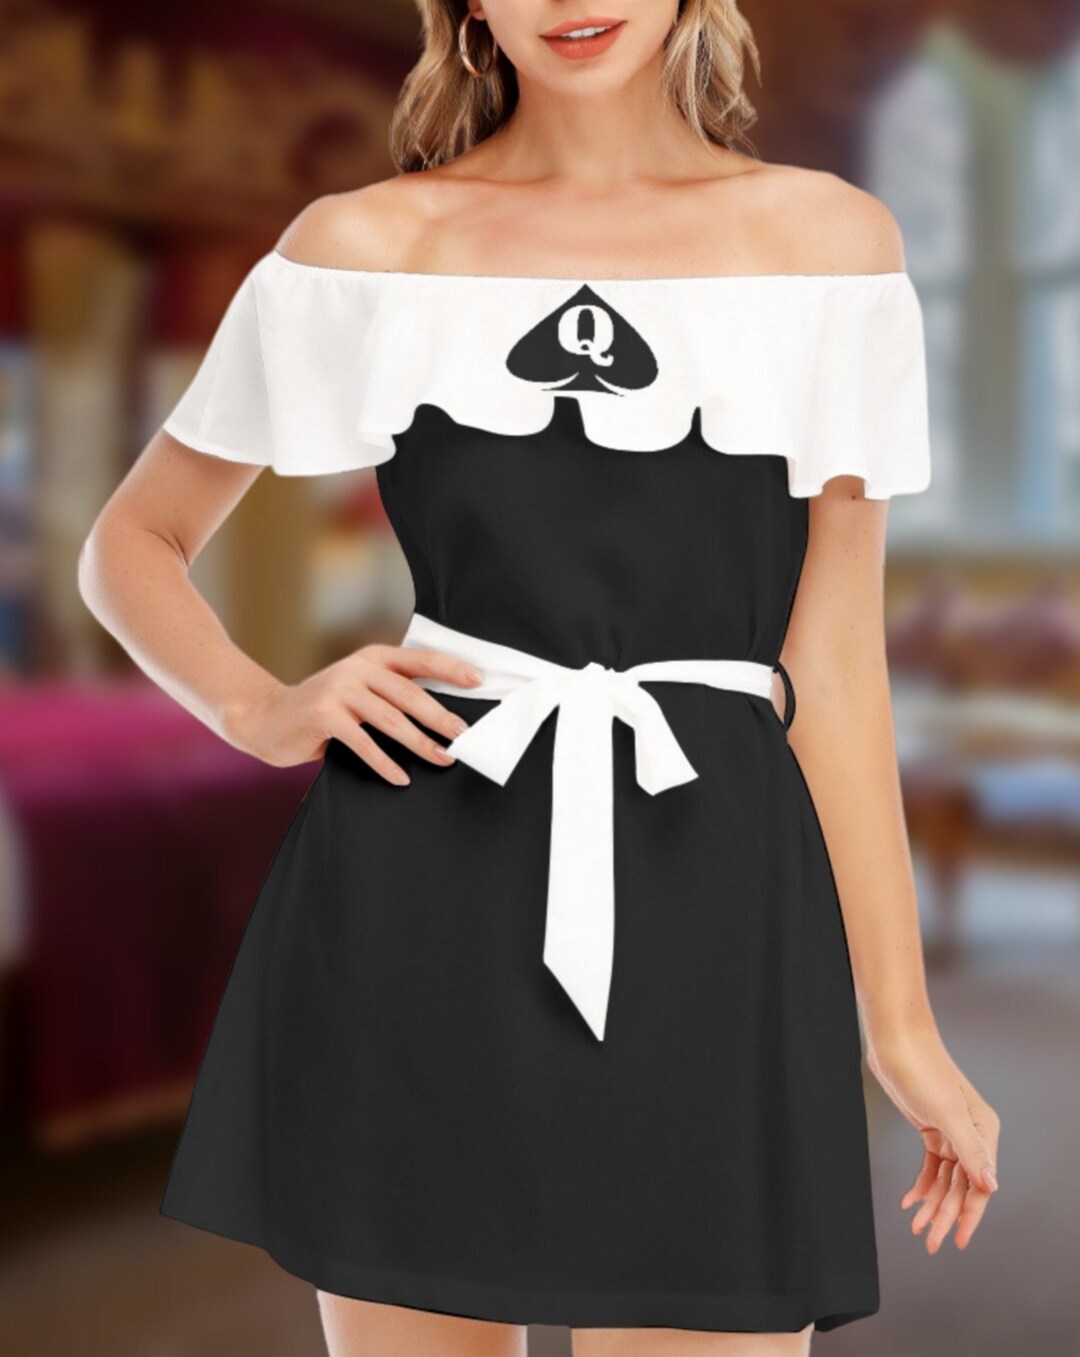 Queen Of Spades Maid Off Shoulder Dress With Ruffle Slut Clothing Cuckolding Hotwife Dress